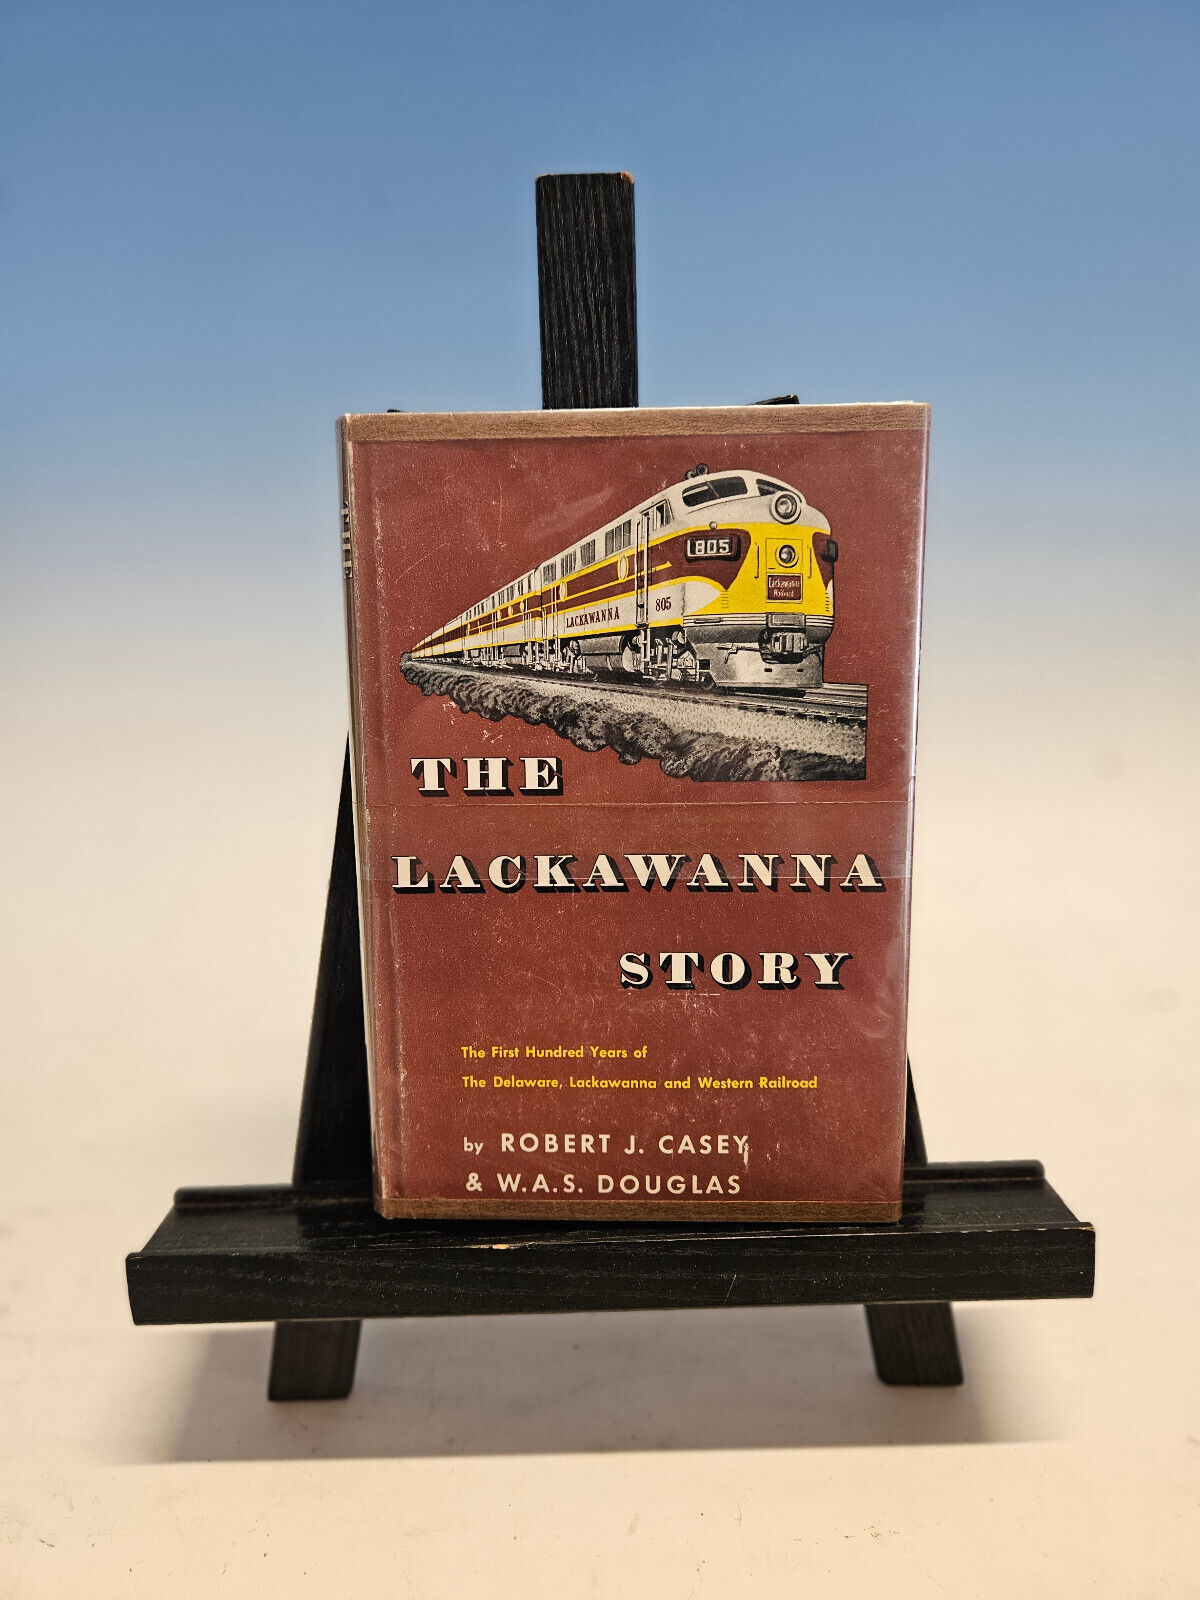 Vintage Railroad Book - The Lackawanna Story by Robert Casey and W.A.S. Douglas